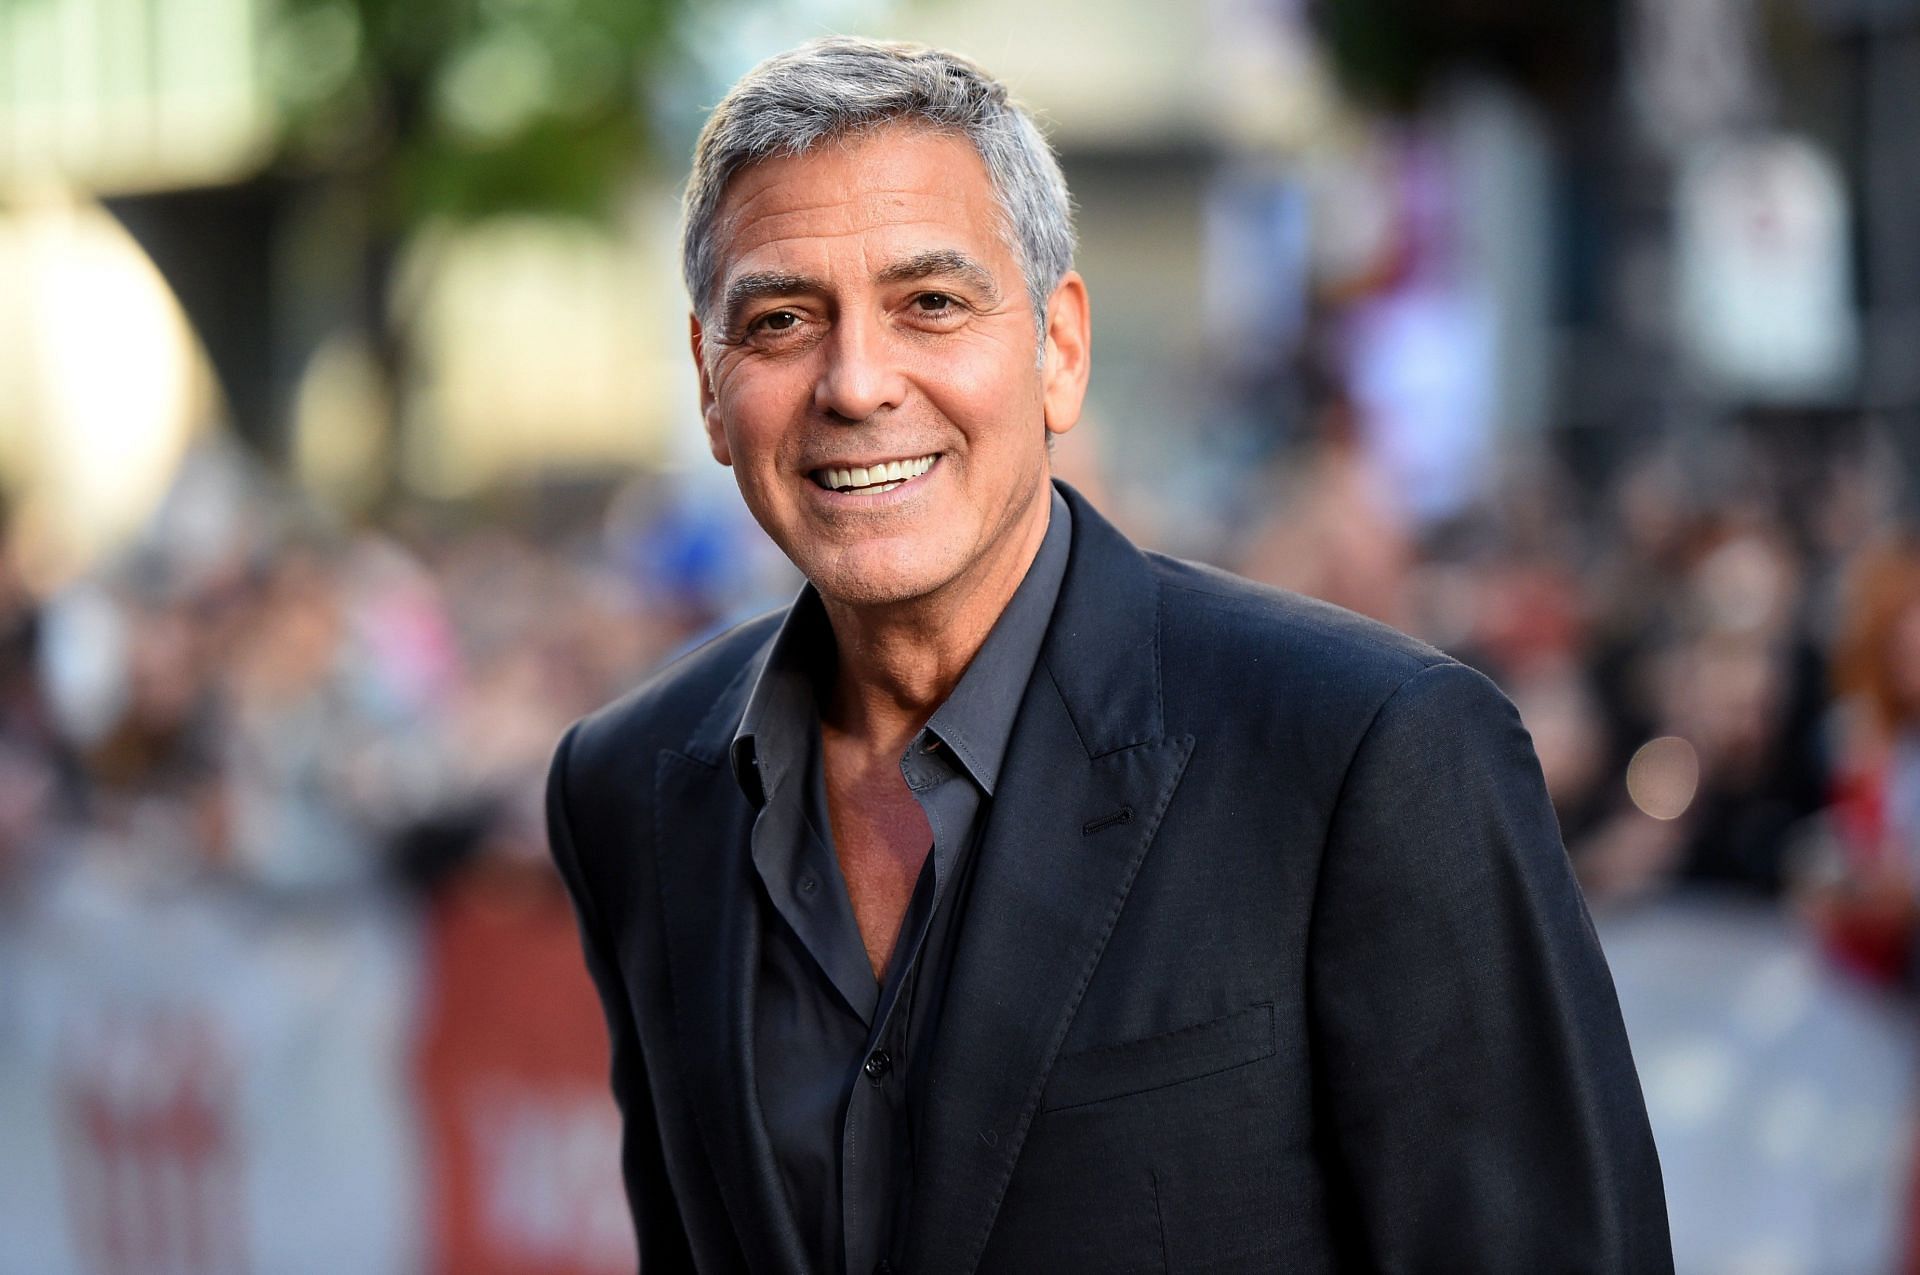 George Clooney (Image via Getty Images)